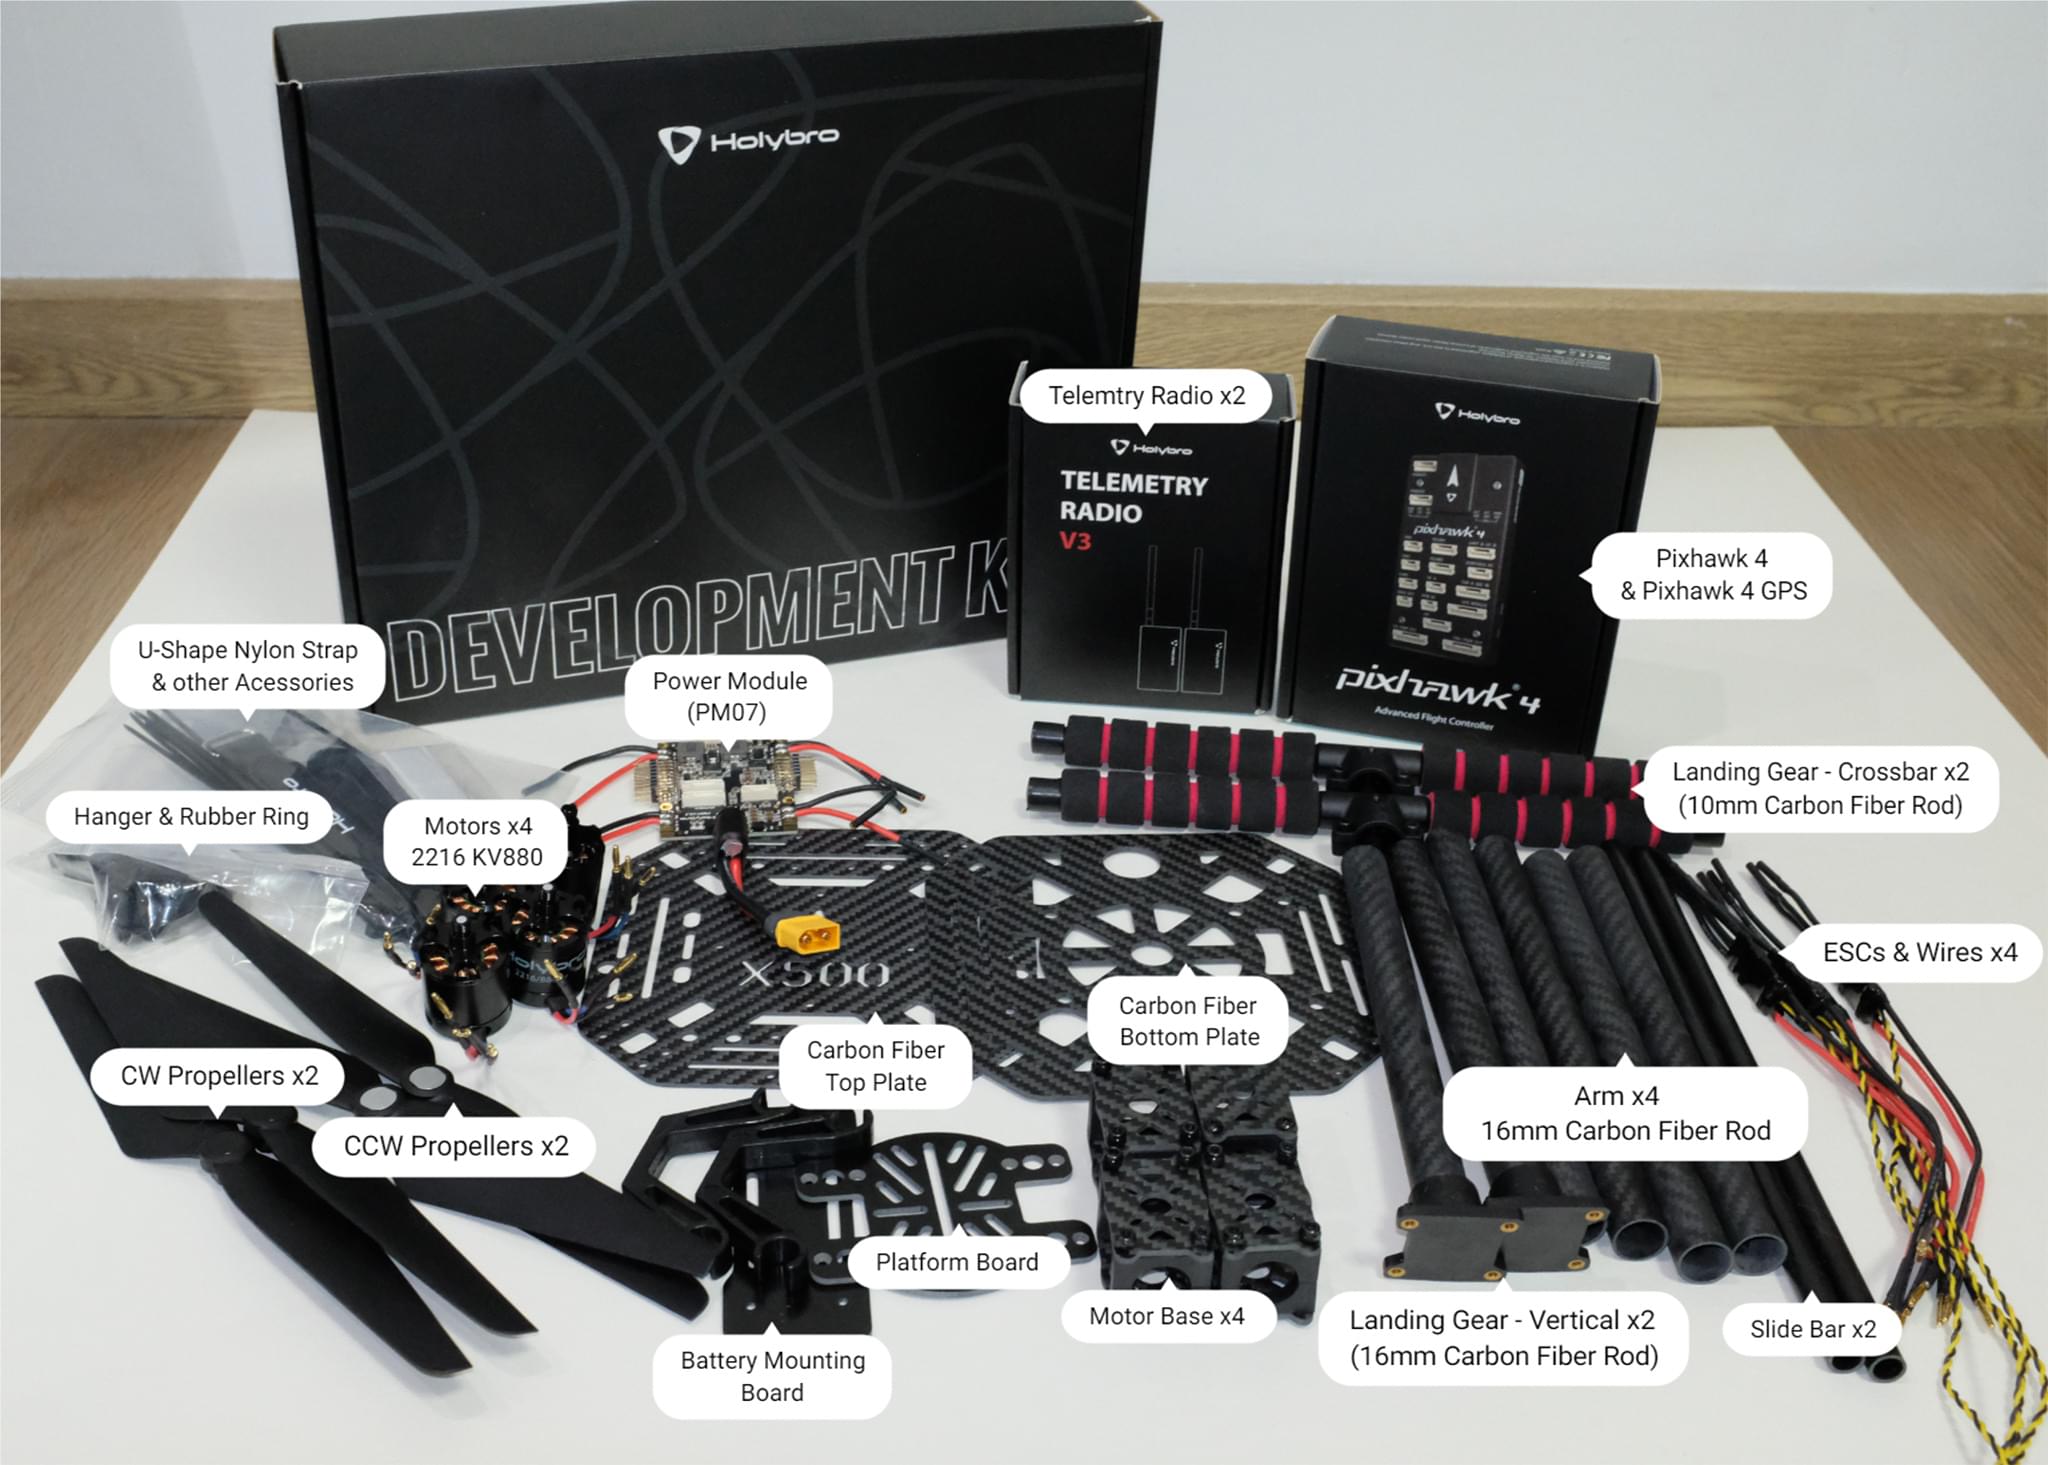 X500 Full Package Contents